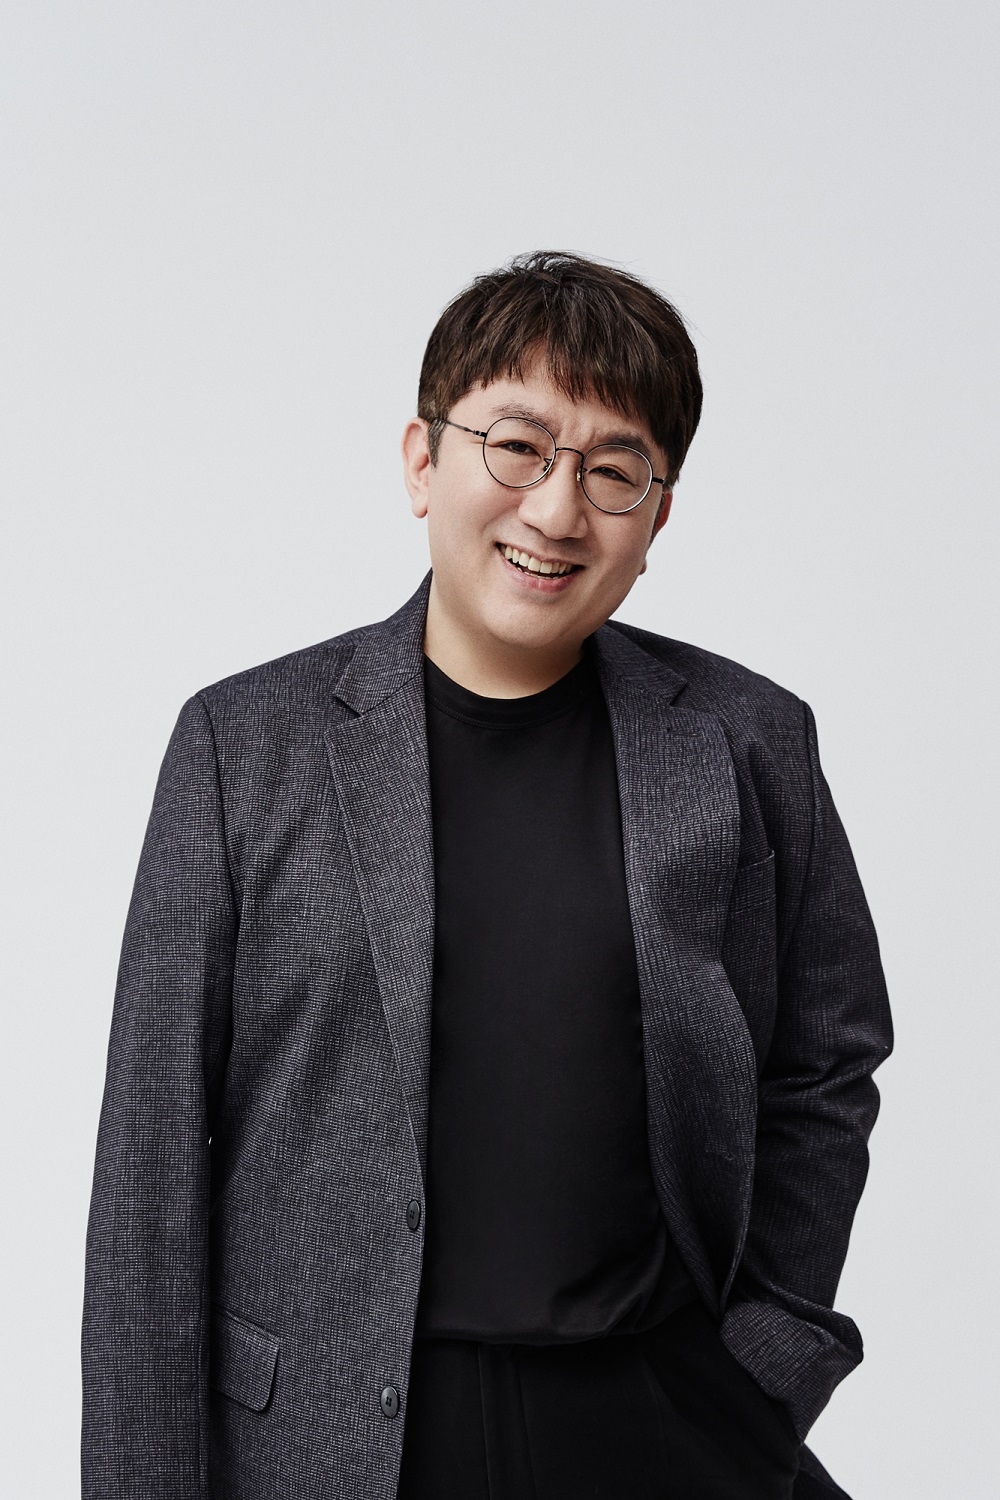 Bang Si-Hyuk, CEO of Big Hit Entertainment, was named New Power Generation.On the 7th (local time), Billboard, a media specializing in United States of America music, published the Meet Musics New Power Generation: 25 Top Innovators, the next generation leader leading the World music market, and published an article on Bang Si-Hyuks representative.BTS, formed by composer and producer Bang Si-Hyuk, has emerged in Western pop music in 2018, Billboard said. It was the first Billboard Hot 100 to be ranked 10th with FAKE LOVE and it became the 111st in Social 50 and decorated the time cover.Billboard also said that BTS was the first Korean artist to have two albums on the Billboard 200, and sold out the first stadium show at United States of America in an hour.We have not set up a special strategy to make it a world pop group, said Bang Si-Hyuk, CEO of Billboard. We work horizontally with BTS.I promised the members that their music should come from their inner story.Bang Si-Hyuk was selected as the International Power Players by Billboard in May last year and was introduced as a leader in moving the former World music market.PHOTOS: Big Hit